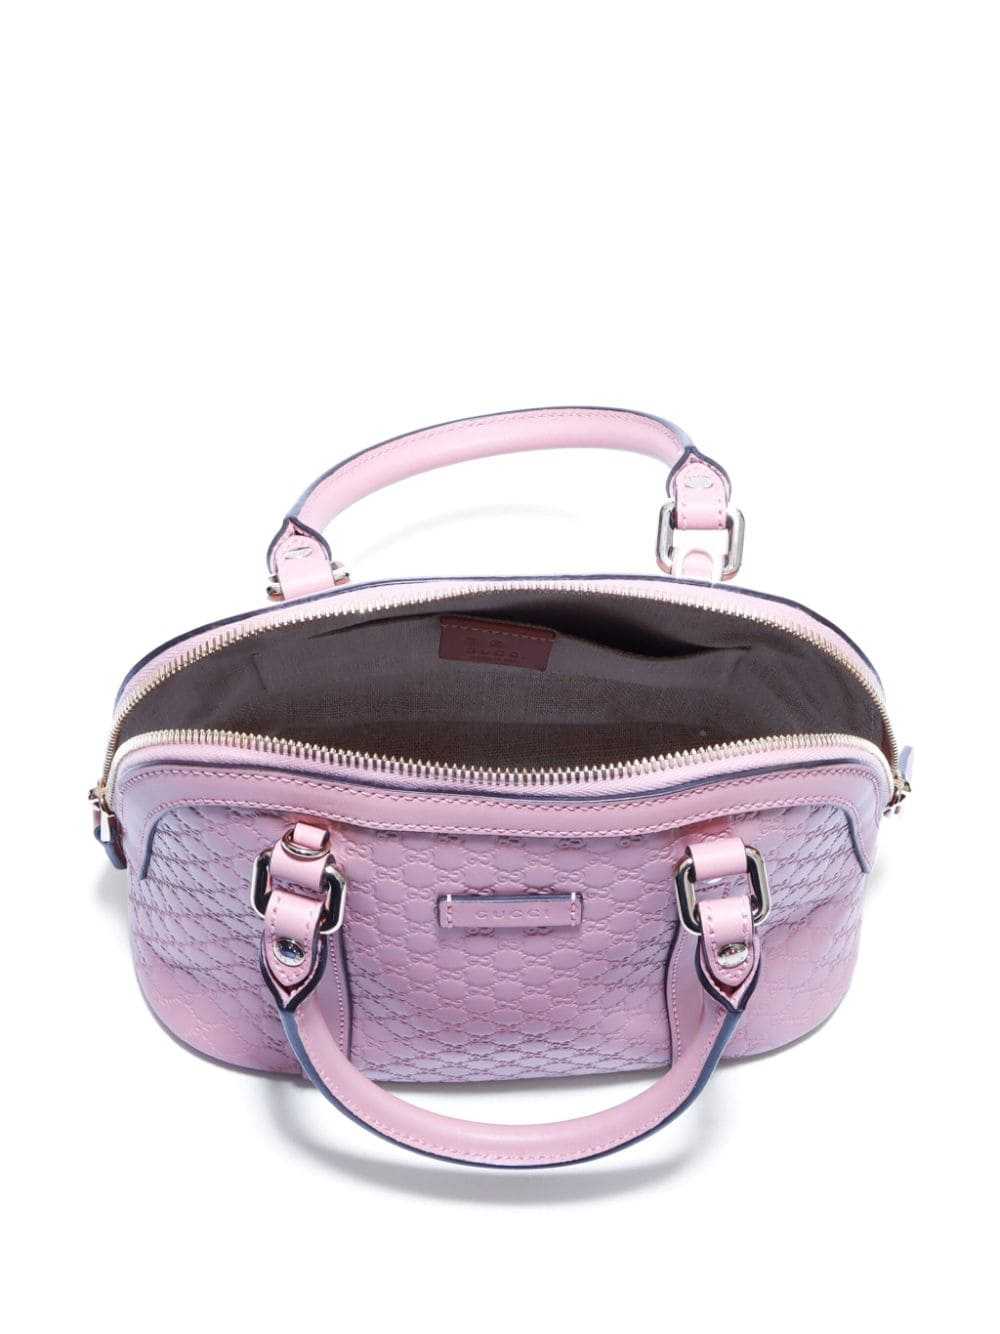 Gucci Pre-Owned Microguccissima two-way bag - Pink - image 4